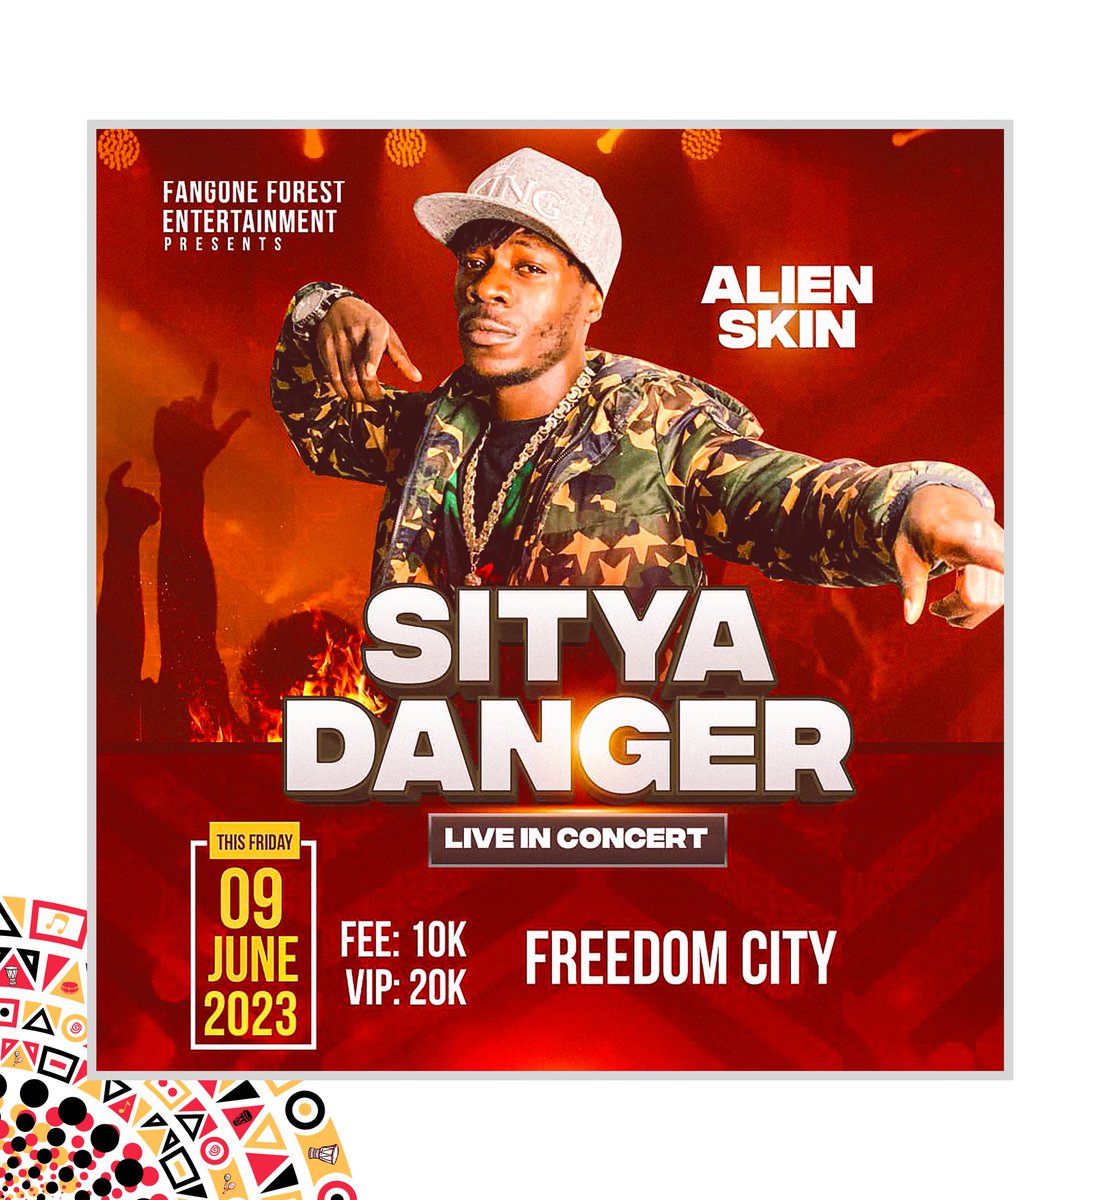 UNMF🇺🇬 invites you to come and support our Brother @Alienskin_ug at SITYA DANGER freedom city 9th-June-2023

🇺🇬 For Togetherness Of Entertainment Industry In UGANDA🇺🇬